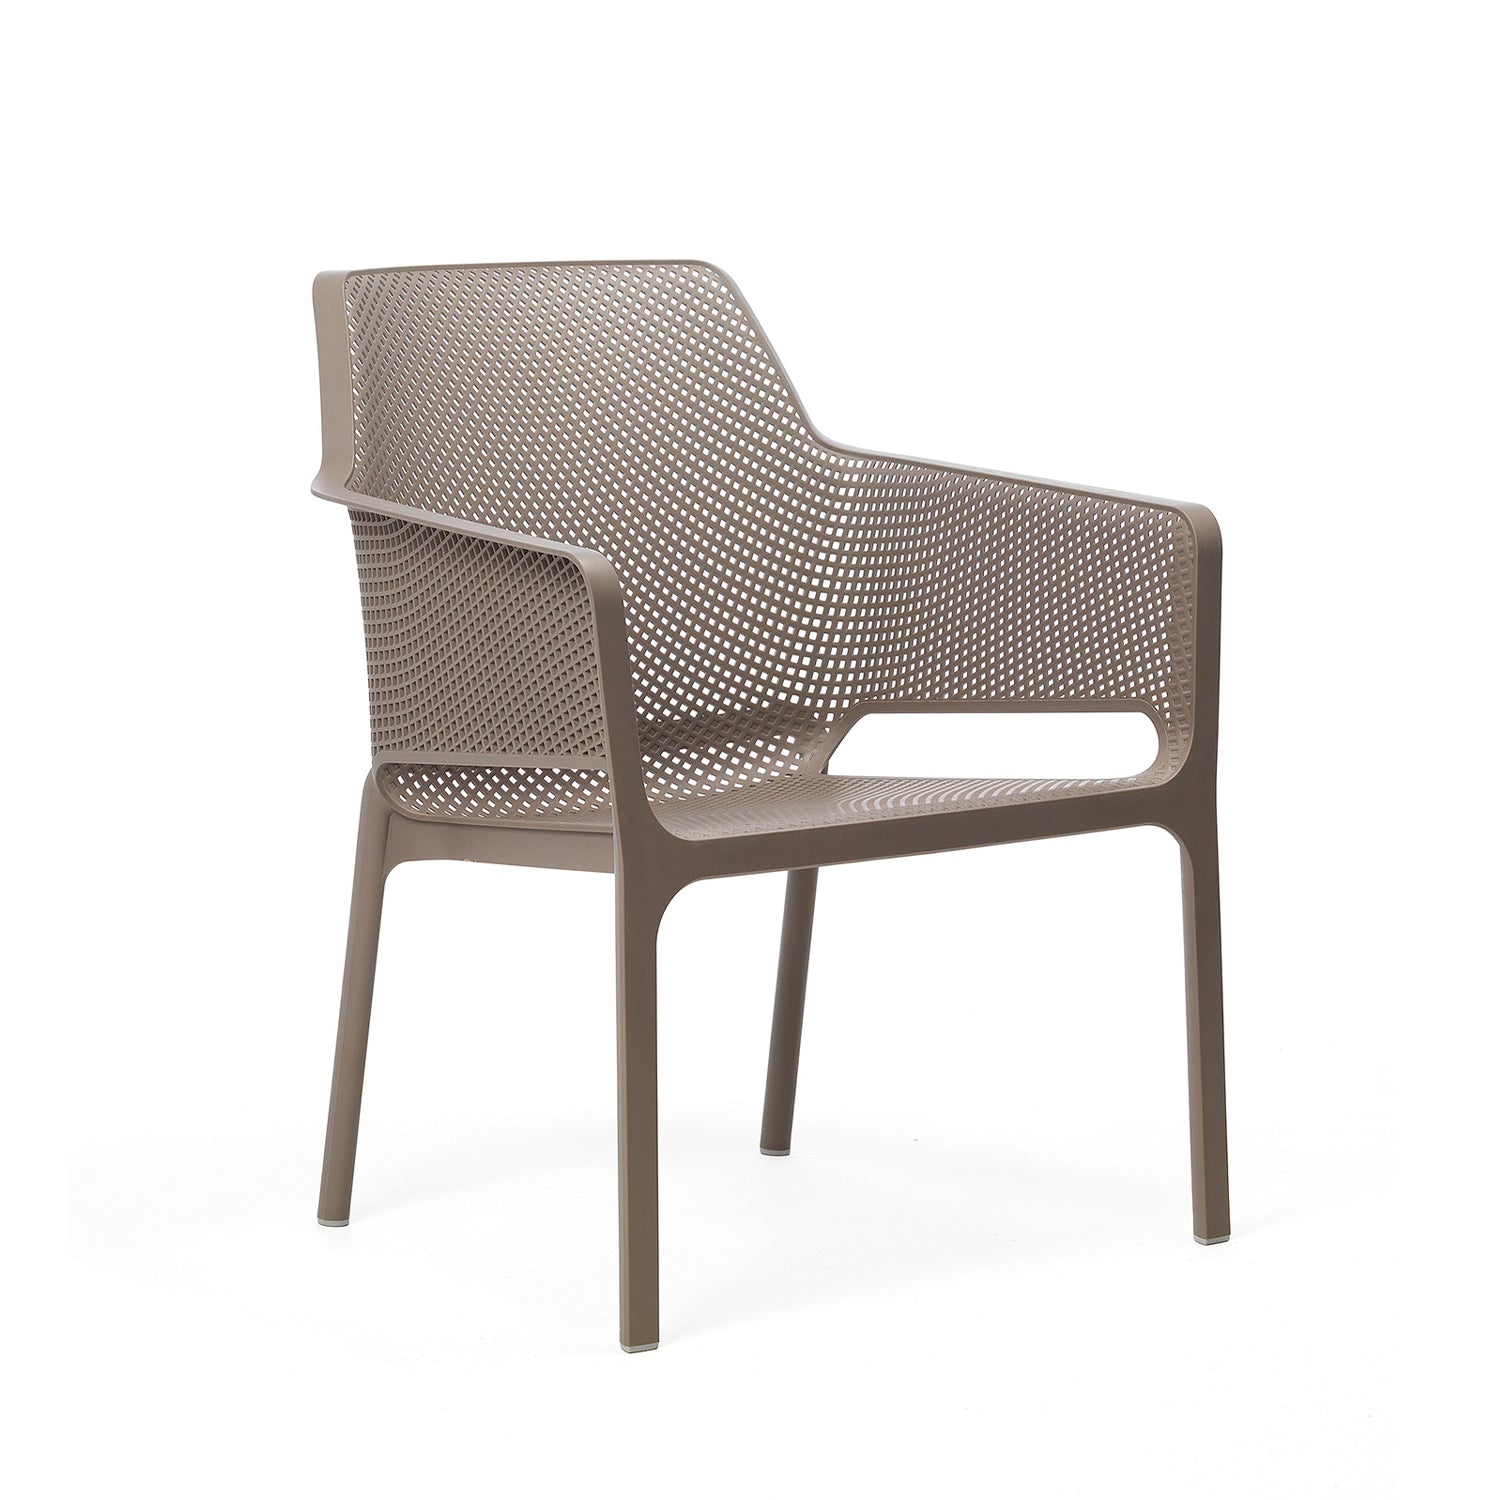 Net Relax Garden Chair By Nardi - Taupe Set Of 6